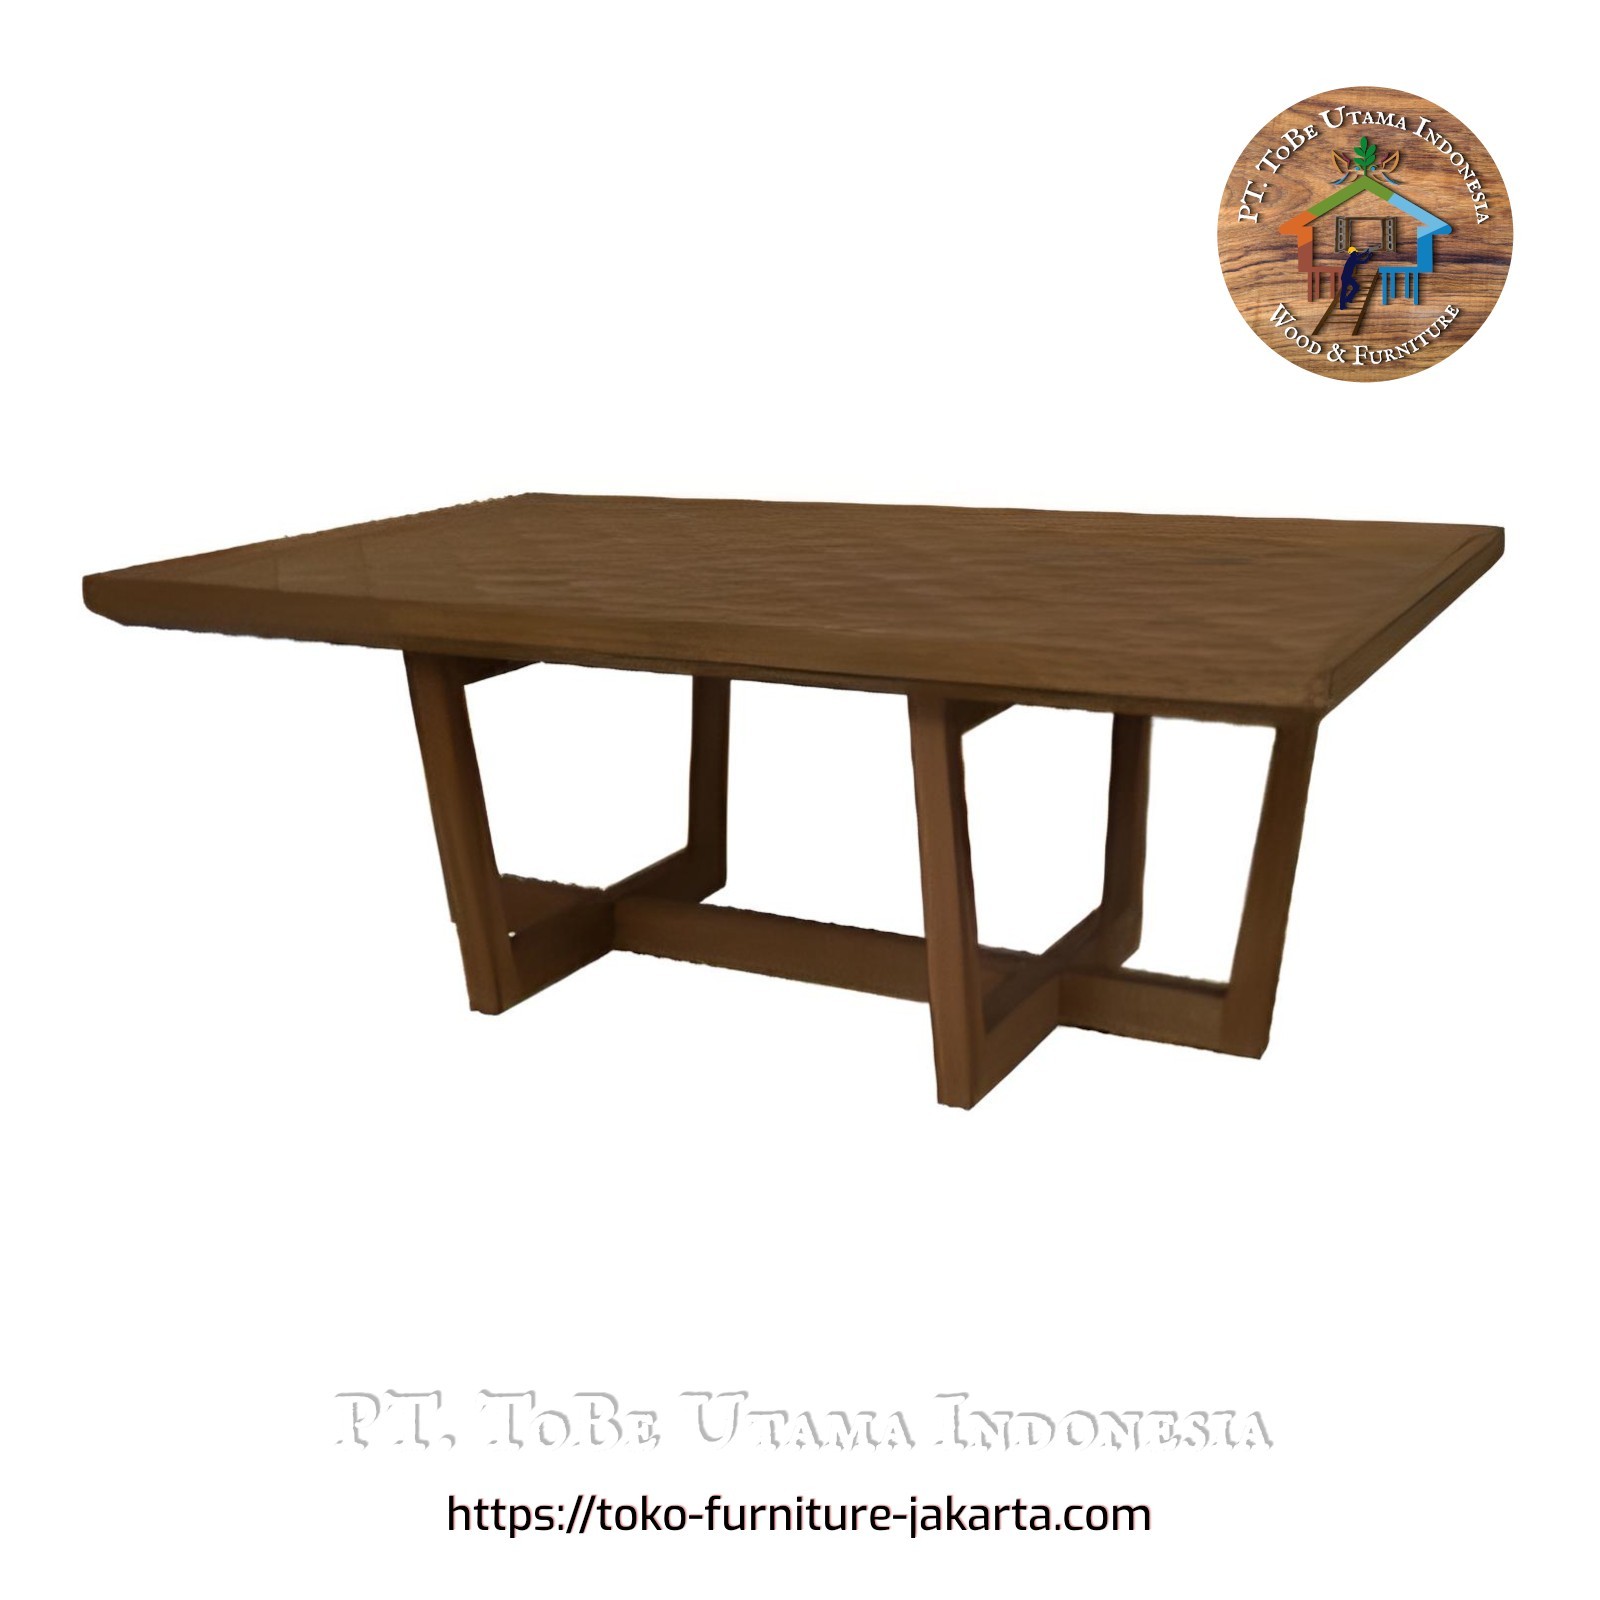 Dining Room: 3D Coffee Table Rectangular (image 1 of 1).